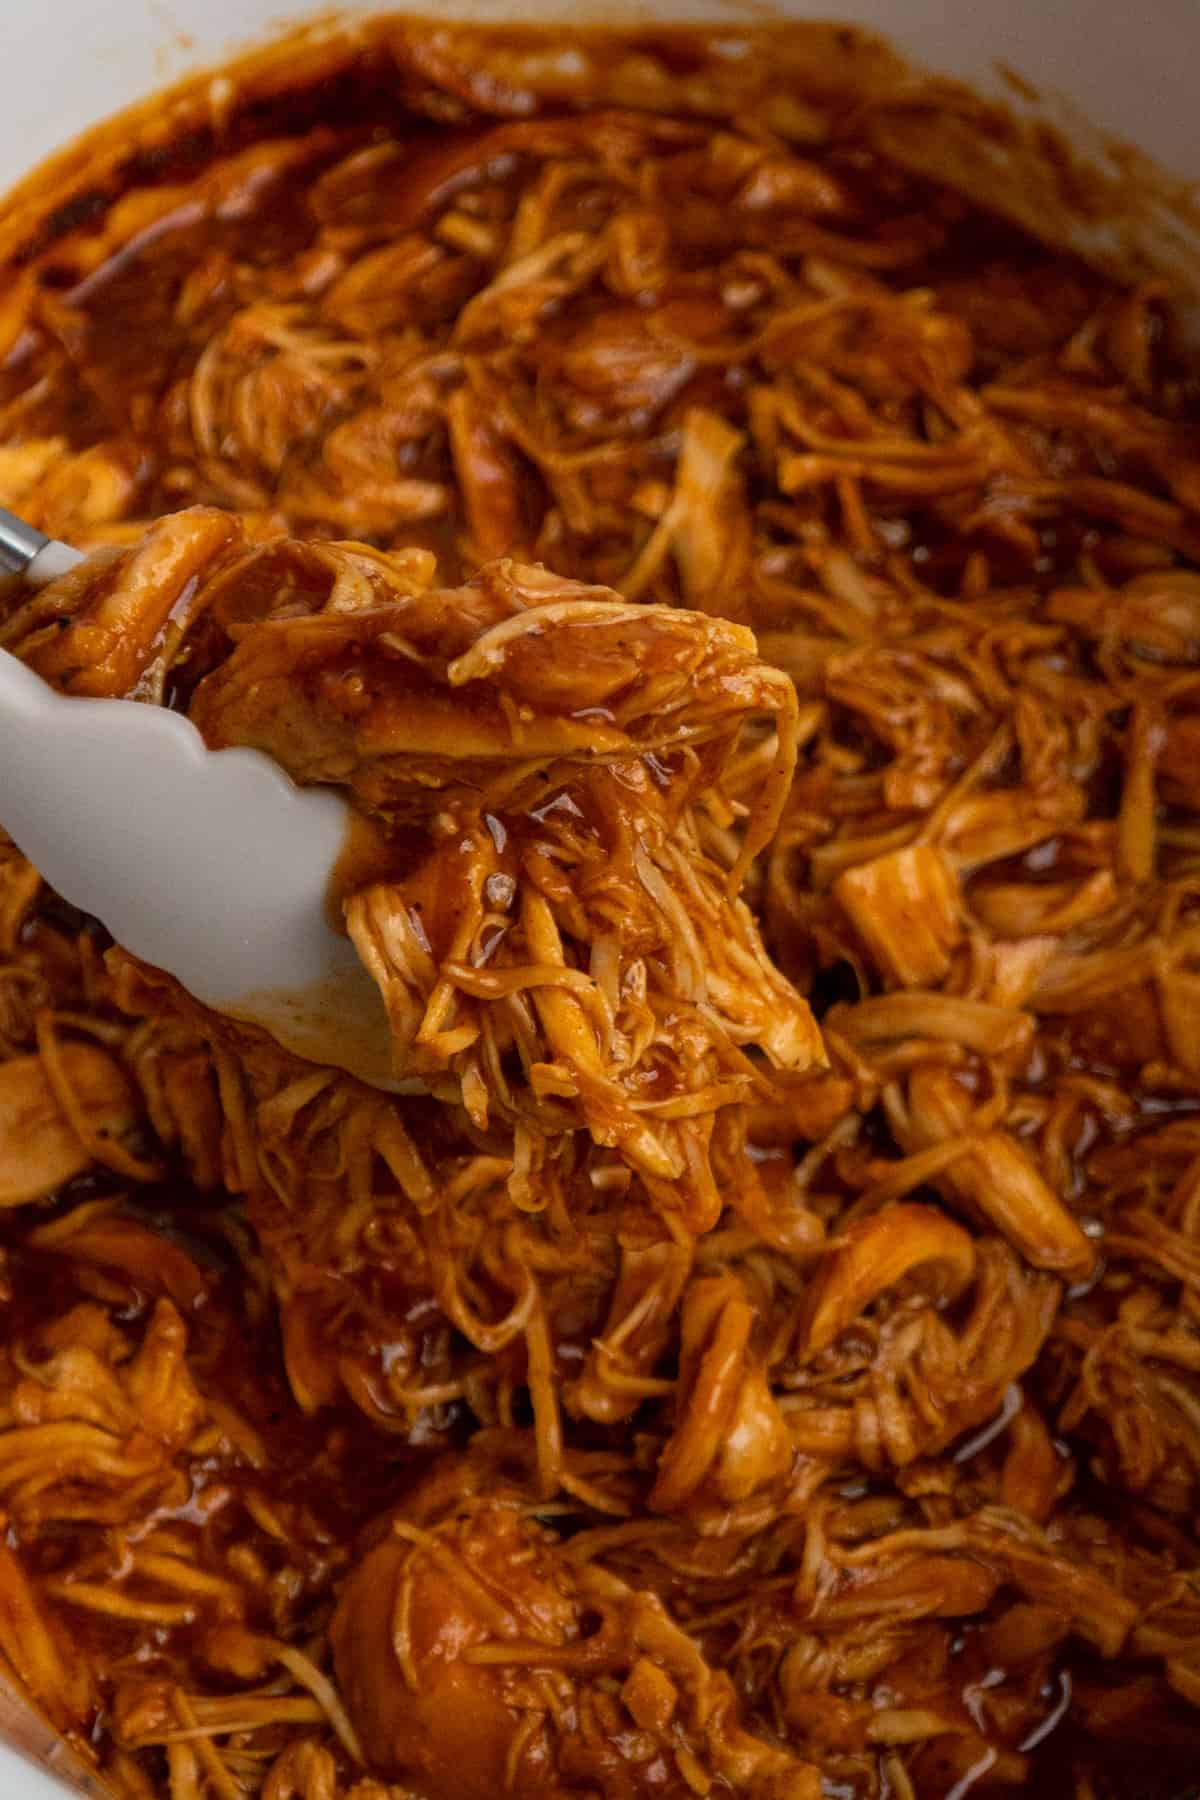 Tongs holding bbq pulled chicken over a crock pot.